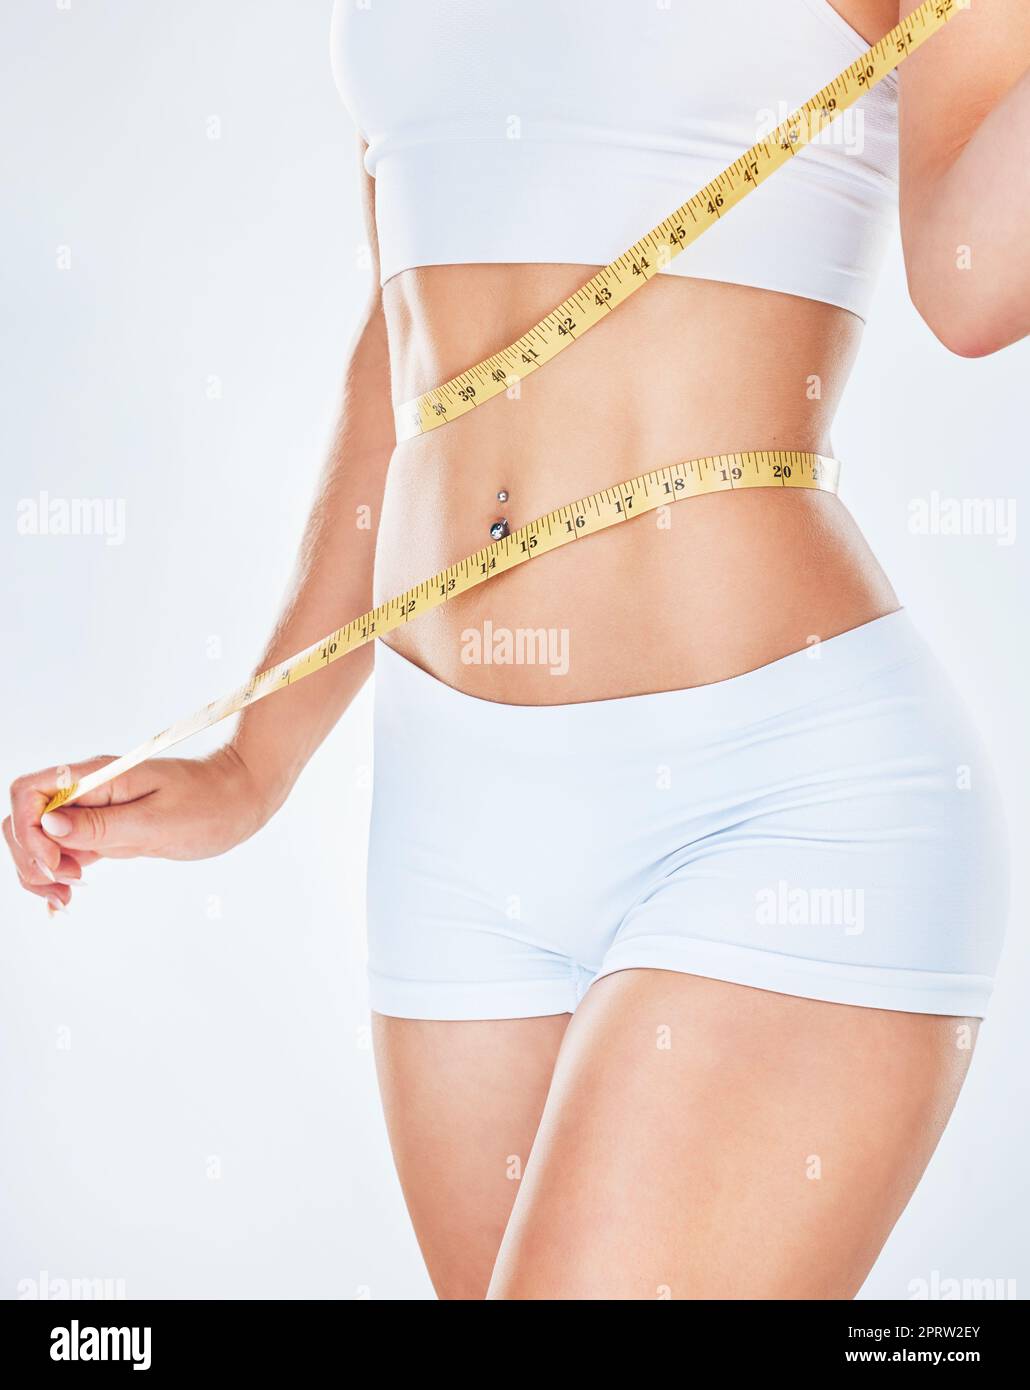 Body, tape measure and diet with a woman measuring her waist to